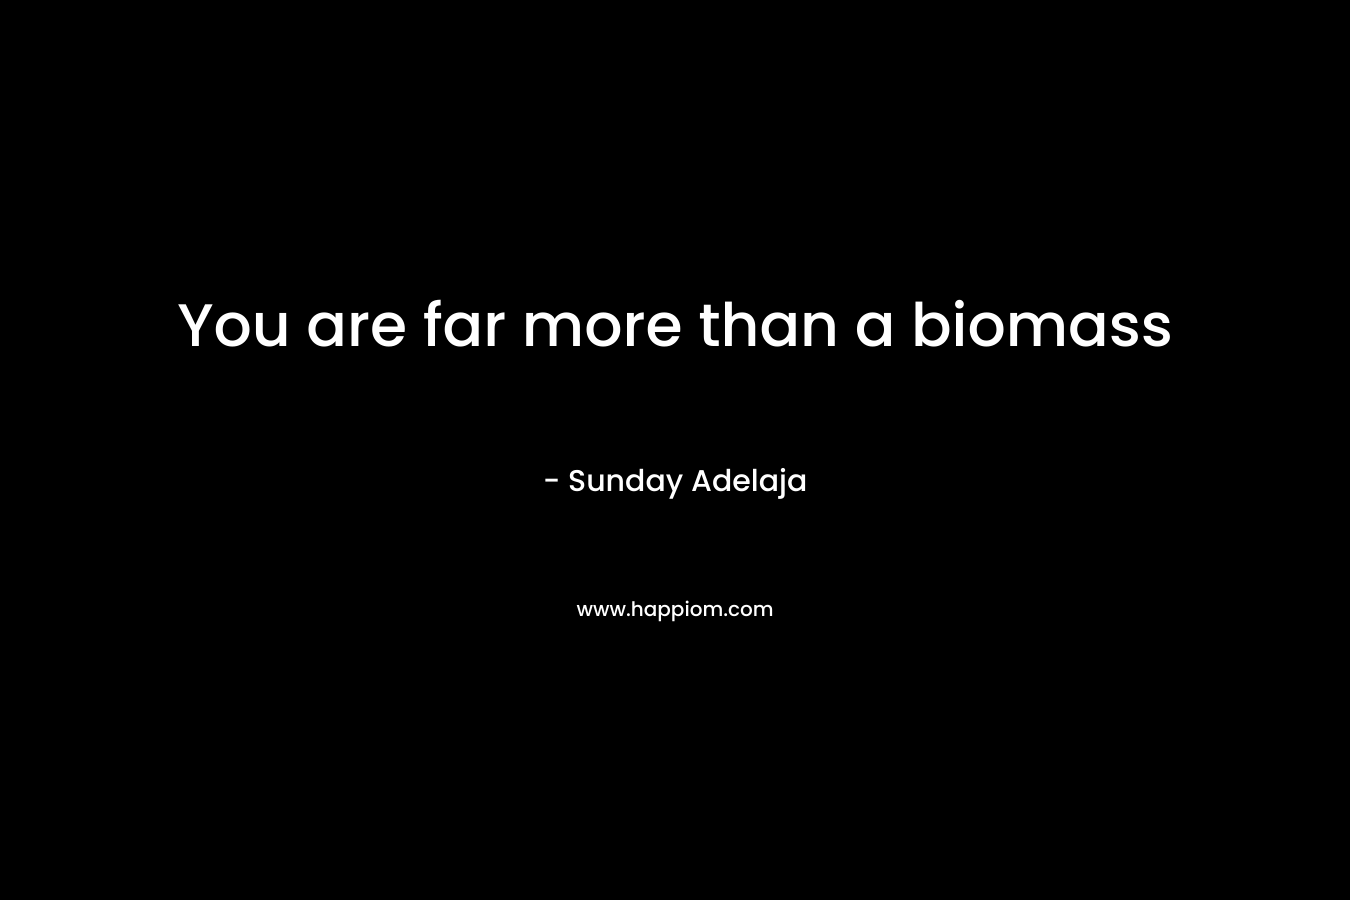 You are far more than a biomass